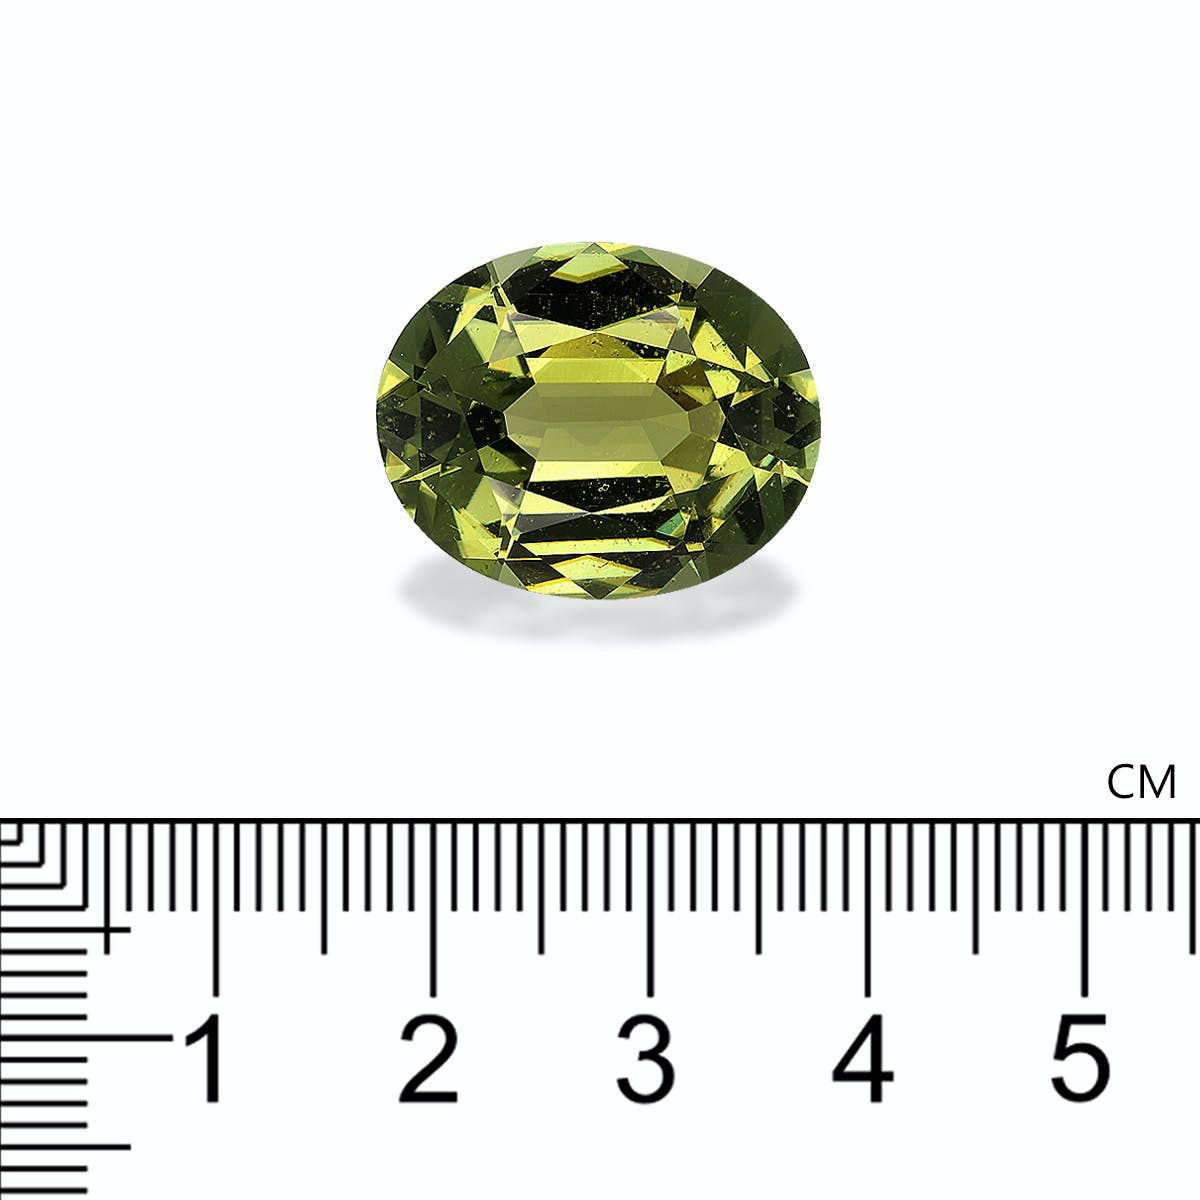 Picture of Lime Green Cuprian Tourmaline 21.03ct (MZ0279)